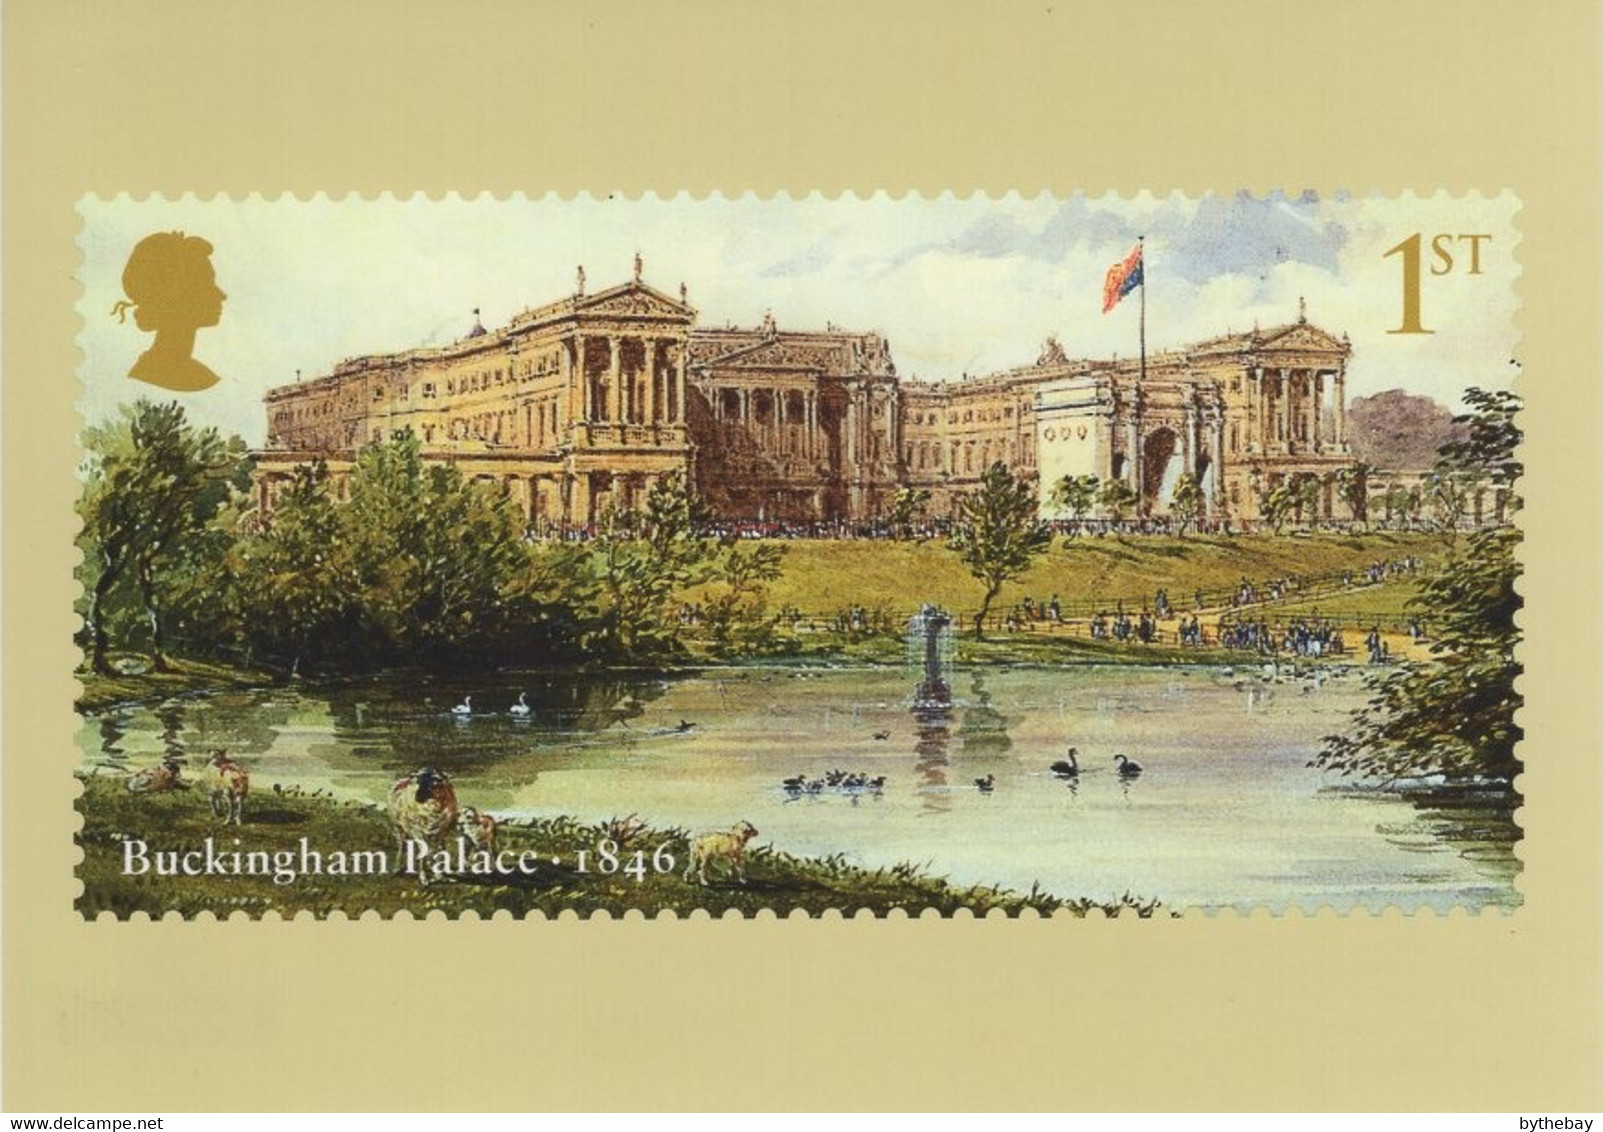 Great Britain 2014 PHQ Card Sc 3281 1st Buckingham Palace 1846 - PHQ Cards